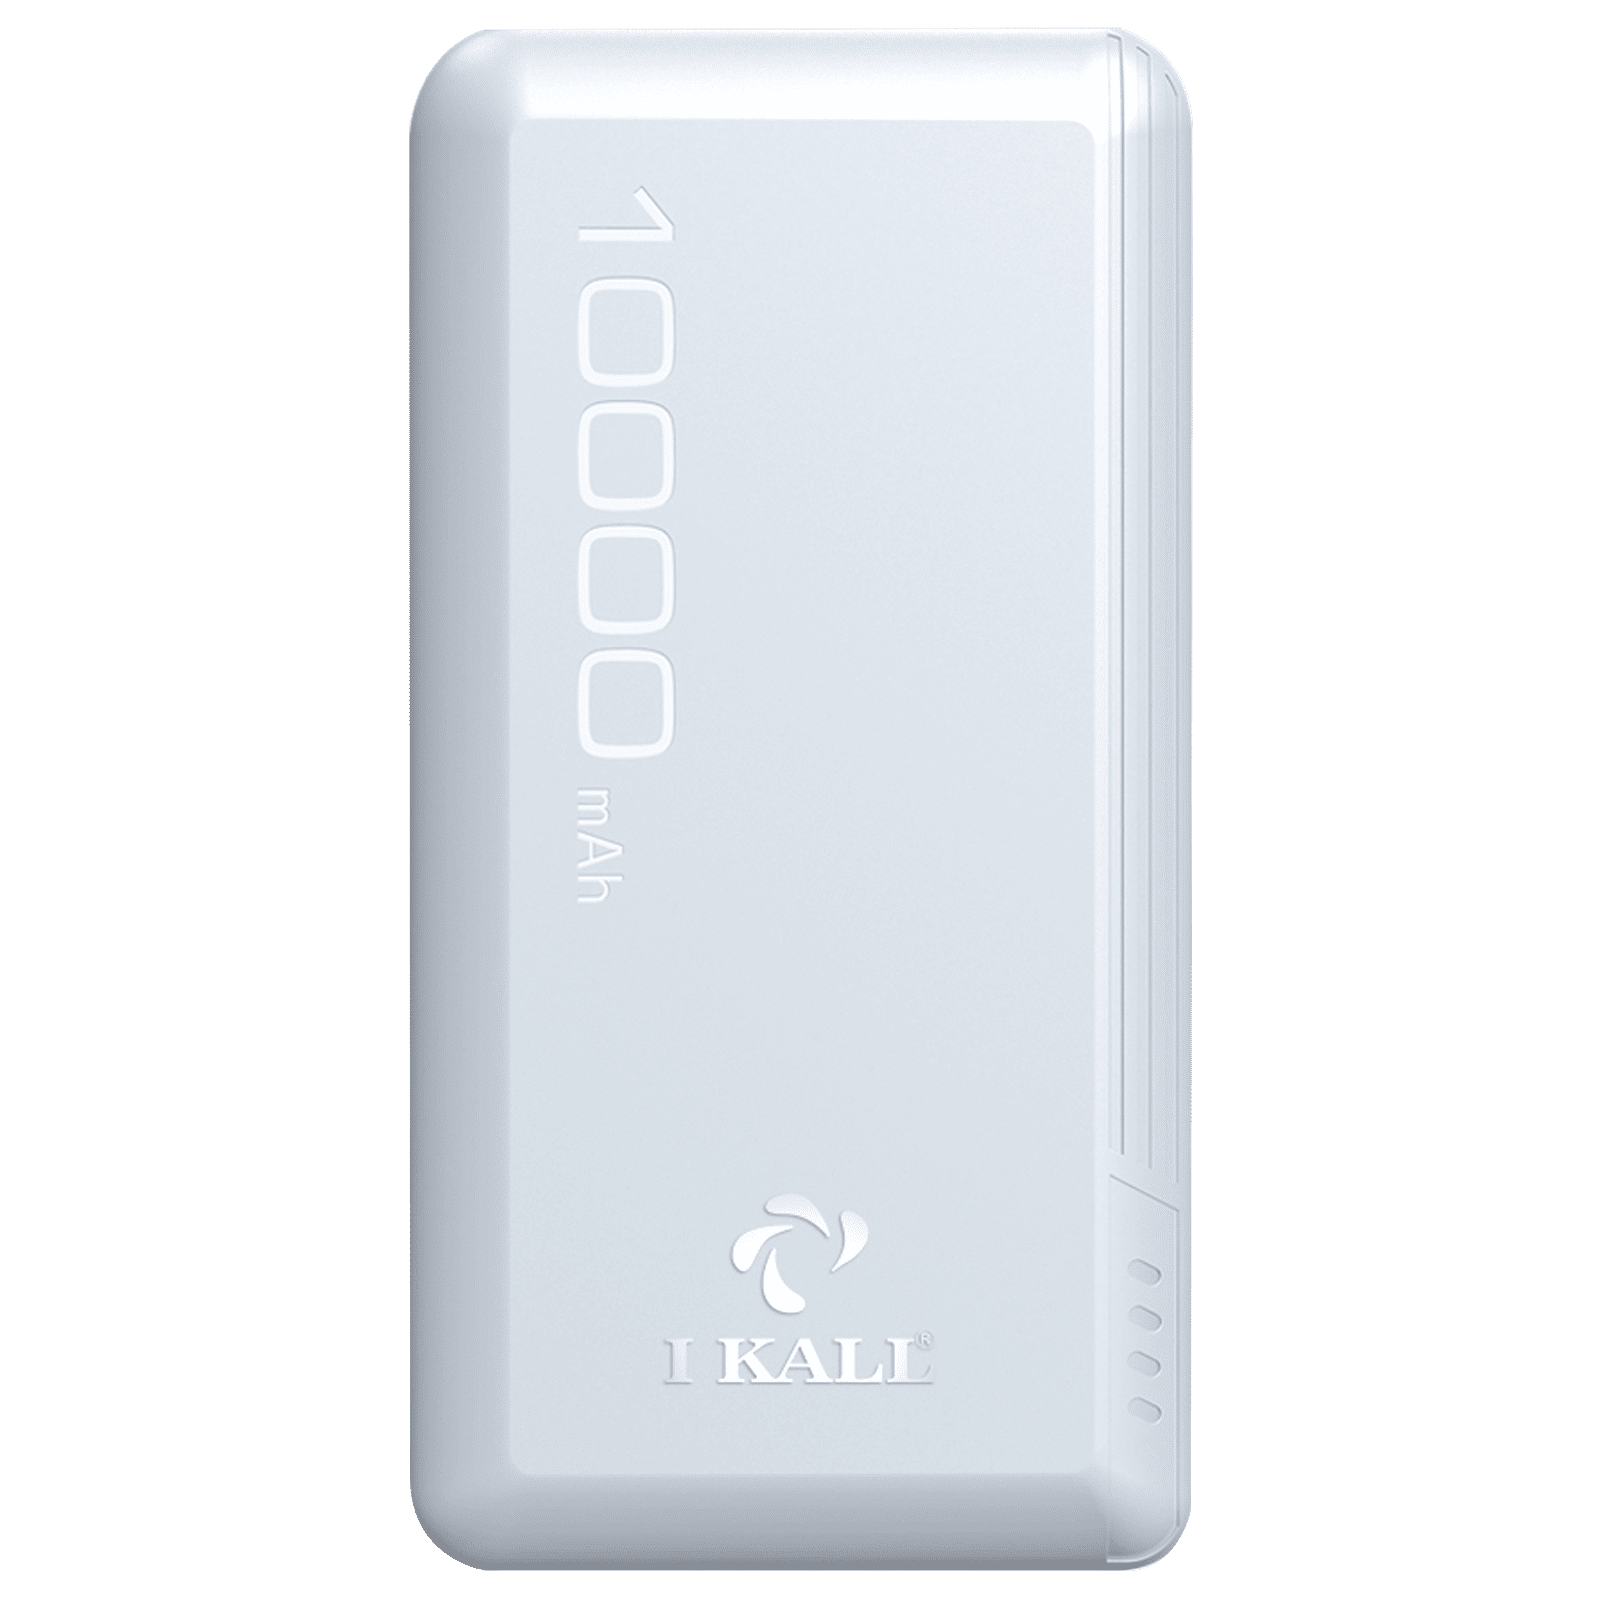 Portable Charger Battery Pack 10000mAh - Fast Charging Universal Power Bank  with Dual USB Ports – USB Cables Included (White)